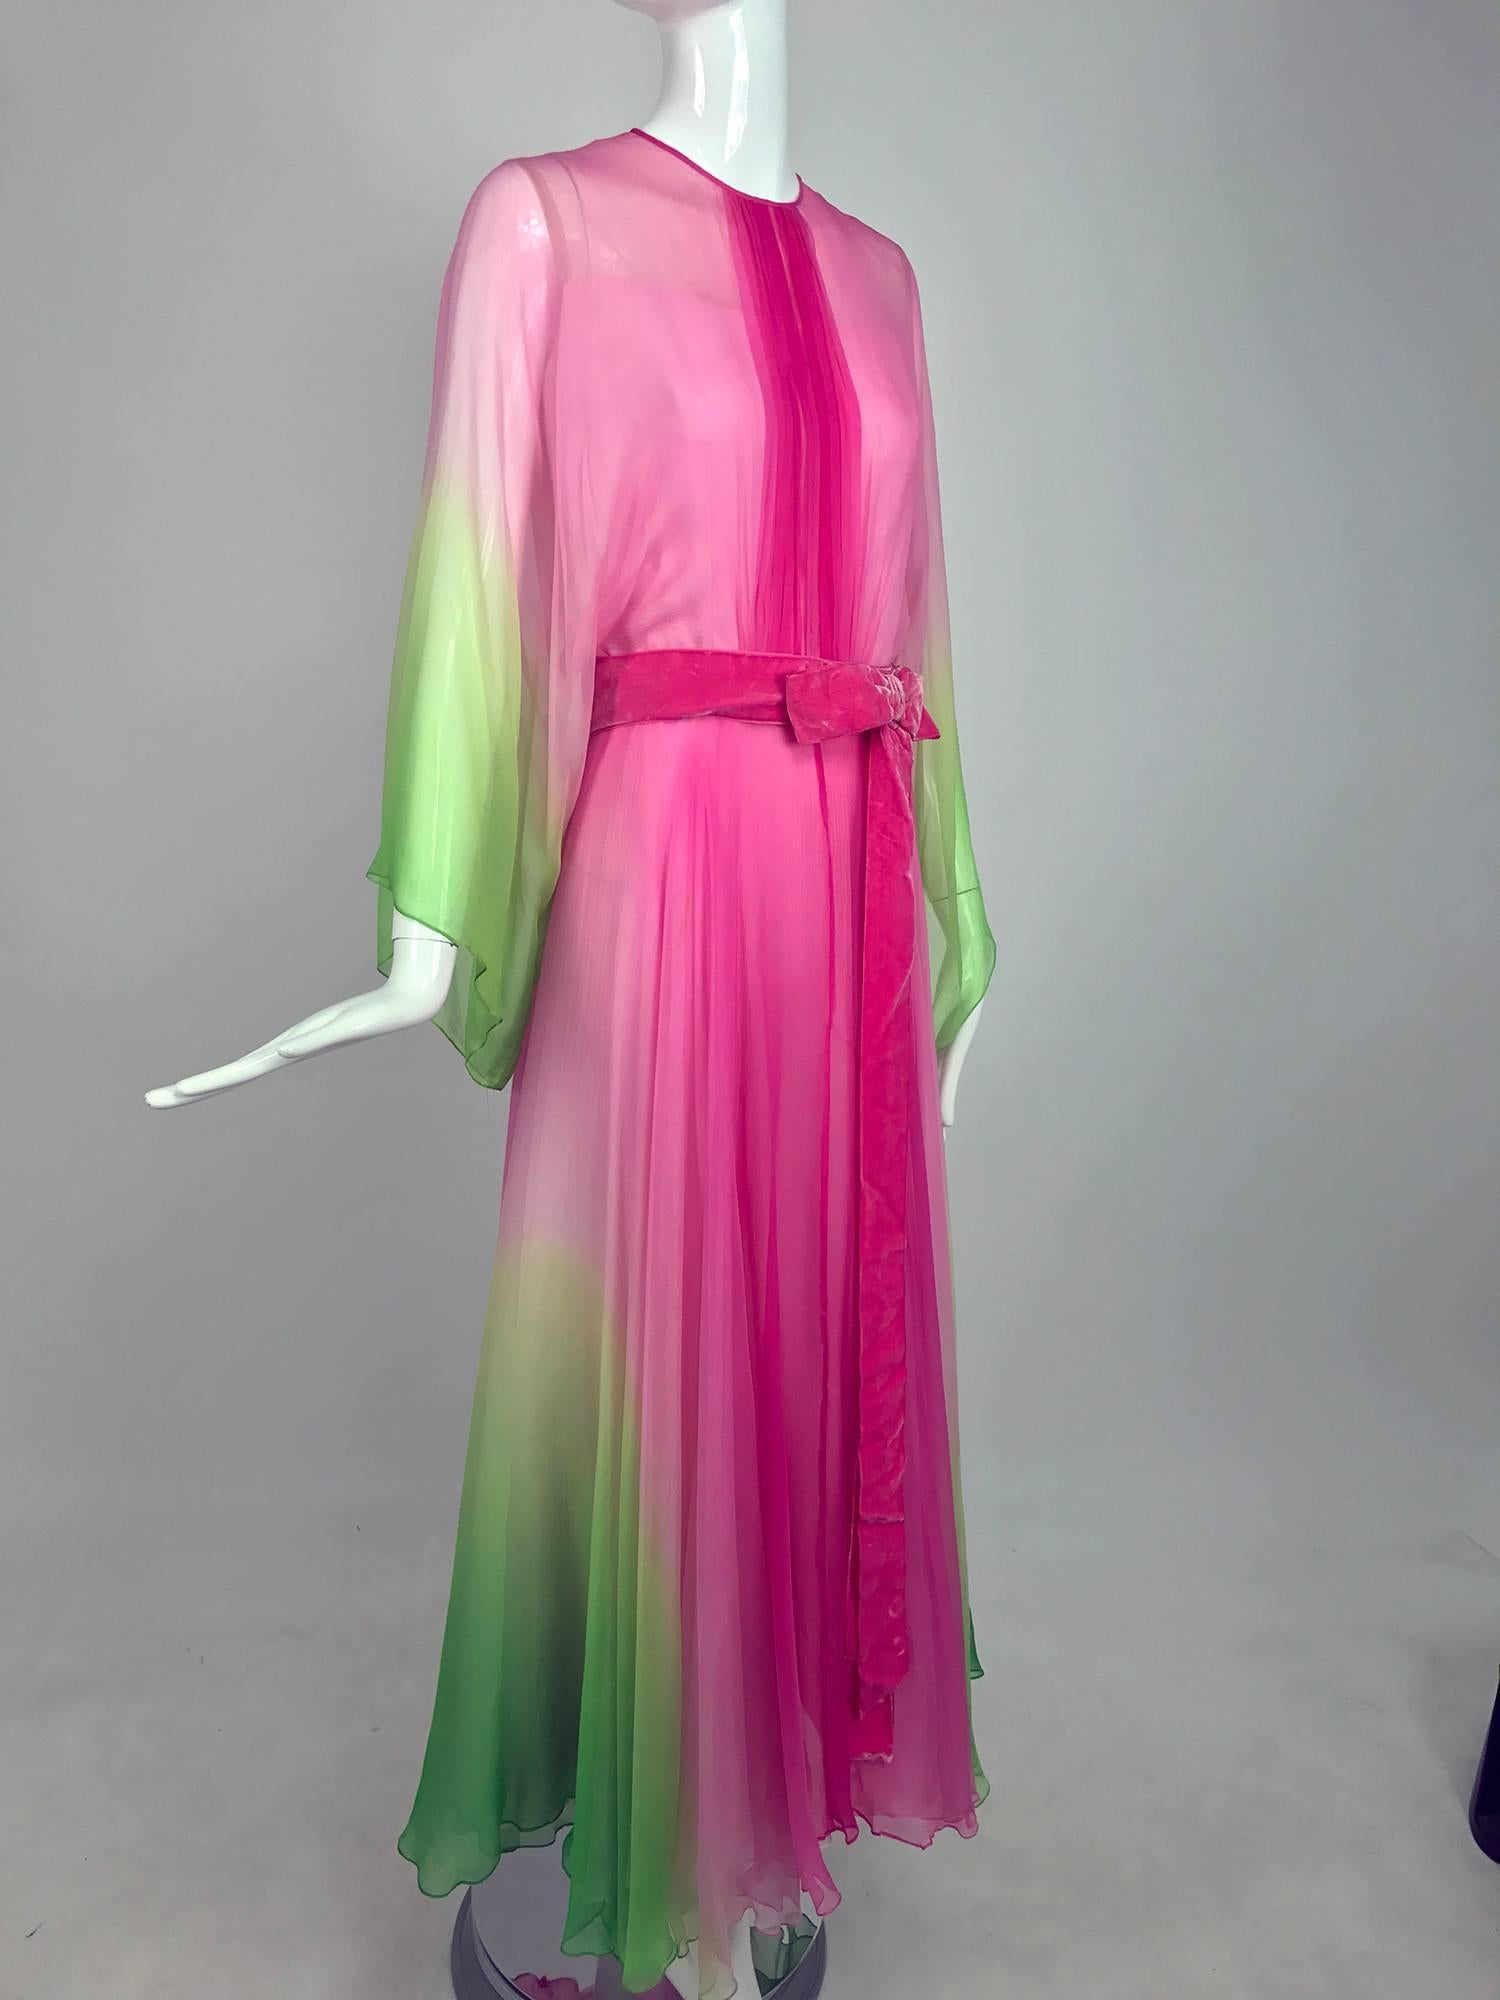 1970s hot pink and lime green ombred silk chiffon kimono sleeve maxi dress from the 1970s...The colour combination of this dress is so beautiful...I love the drape of the fabric and the wide kimono sleeves...Jewel neckline dress has vertical pleats